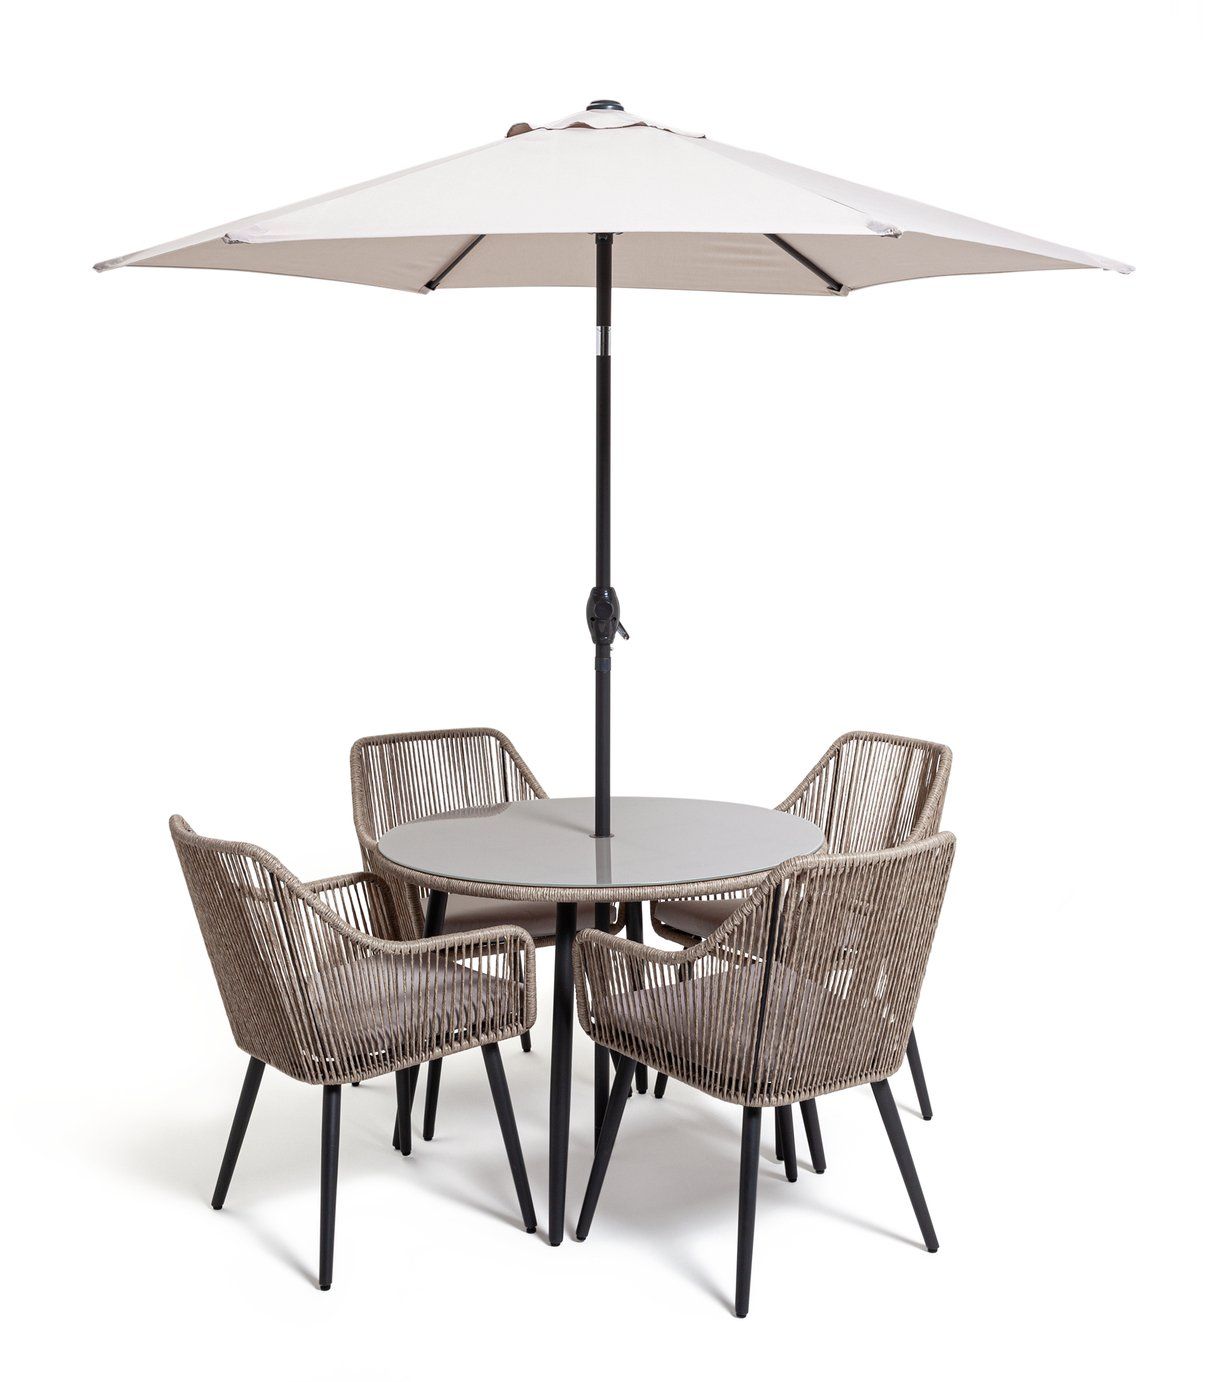 The Ultimate Guide to Patio Table Sets: Finding the Perfect Outdoor Dining Experience